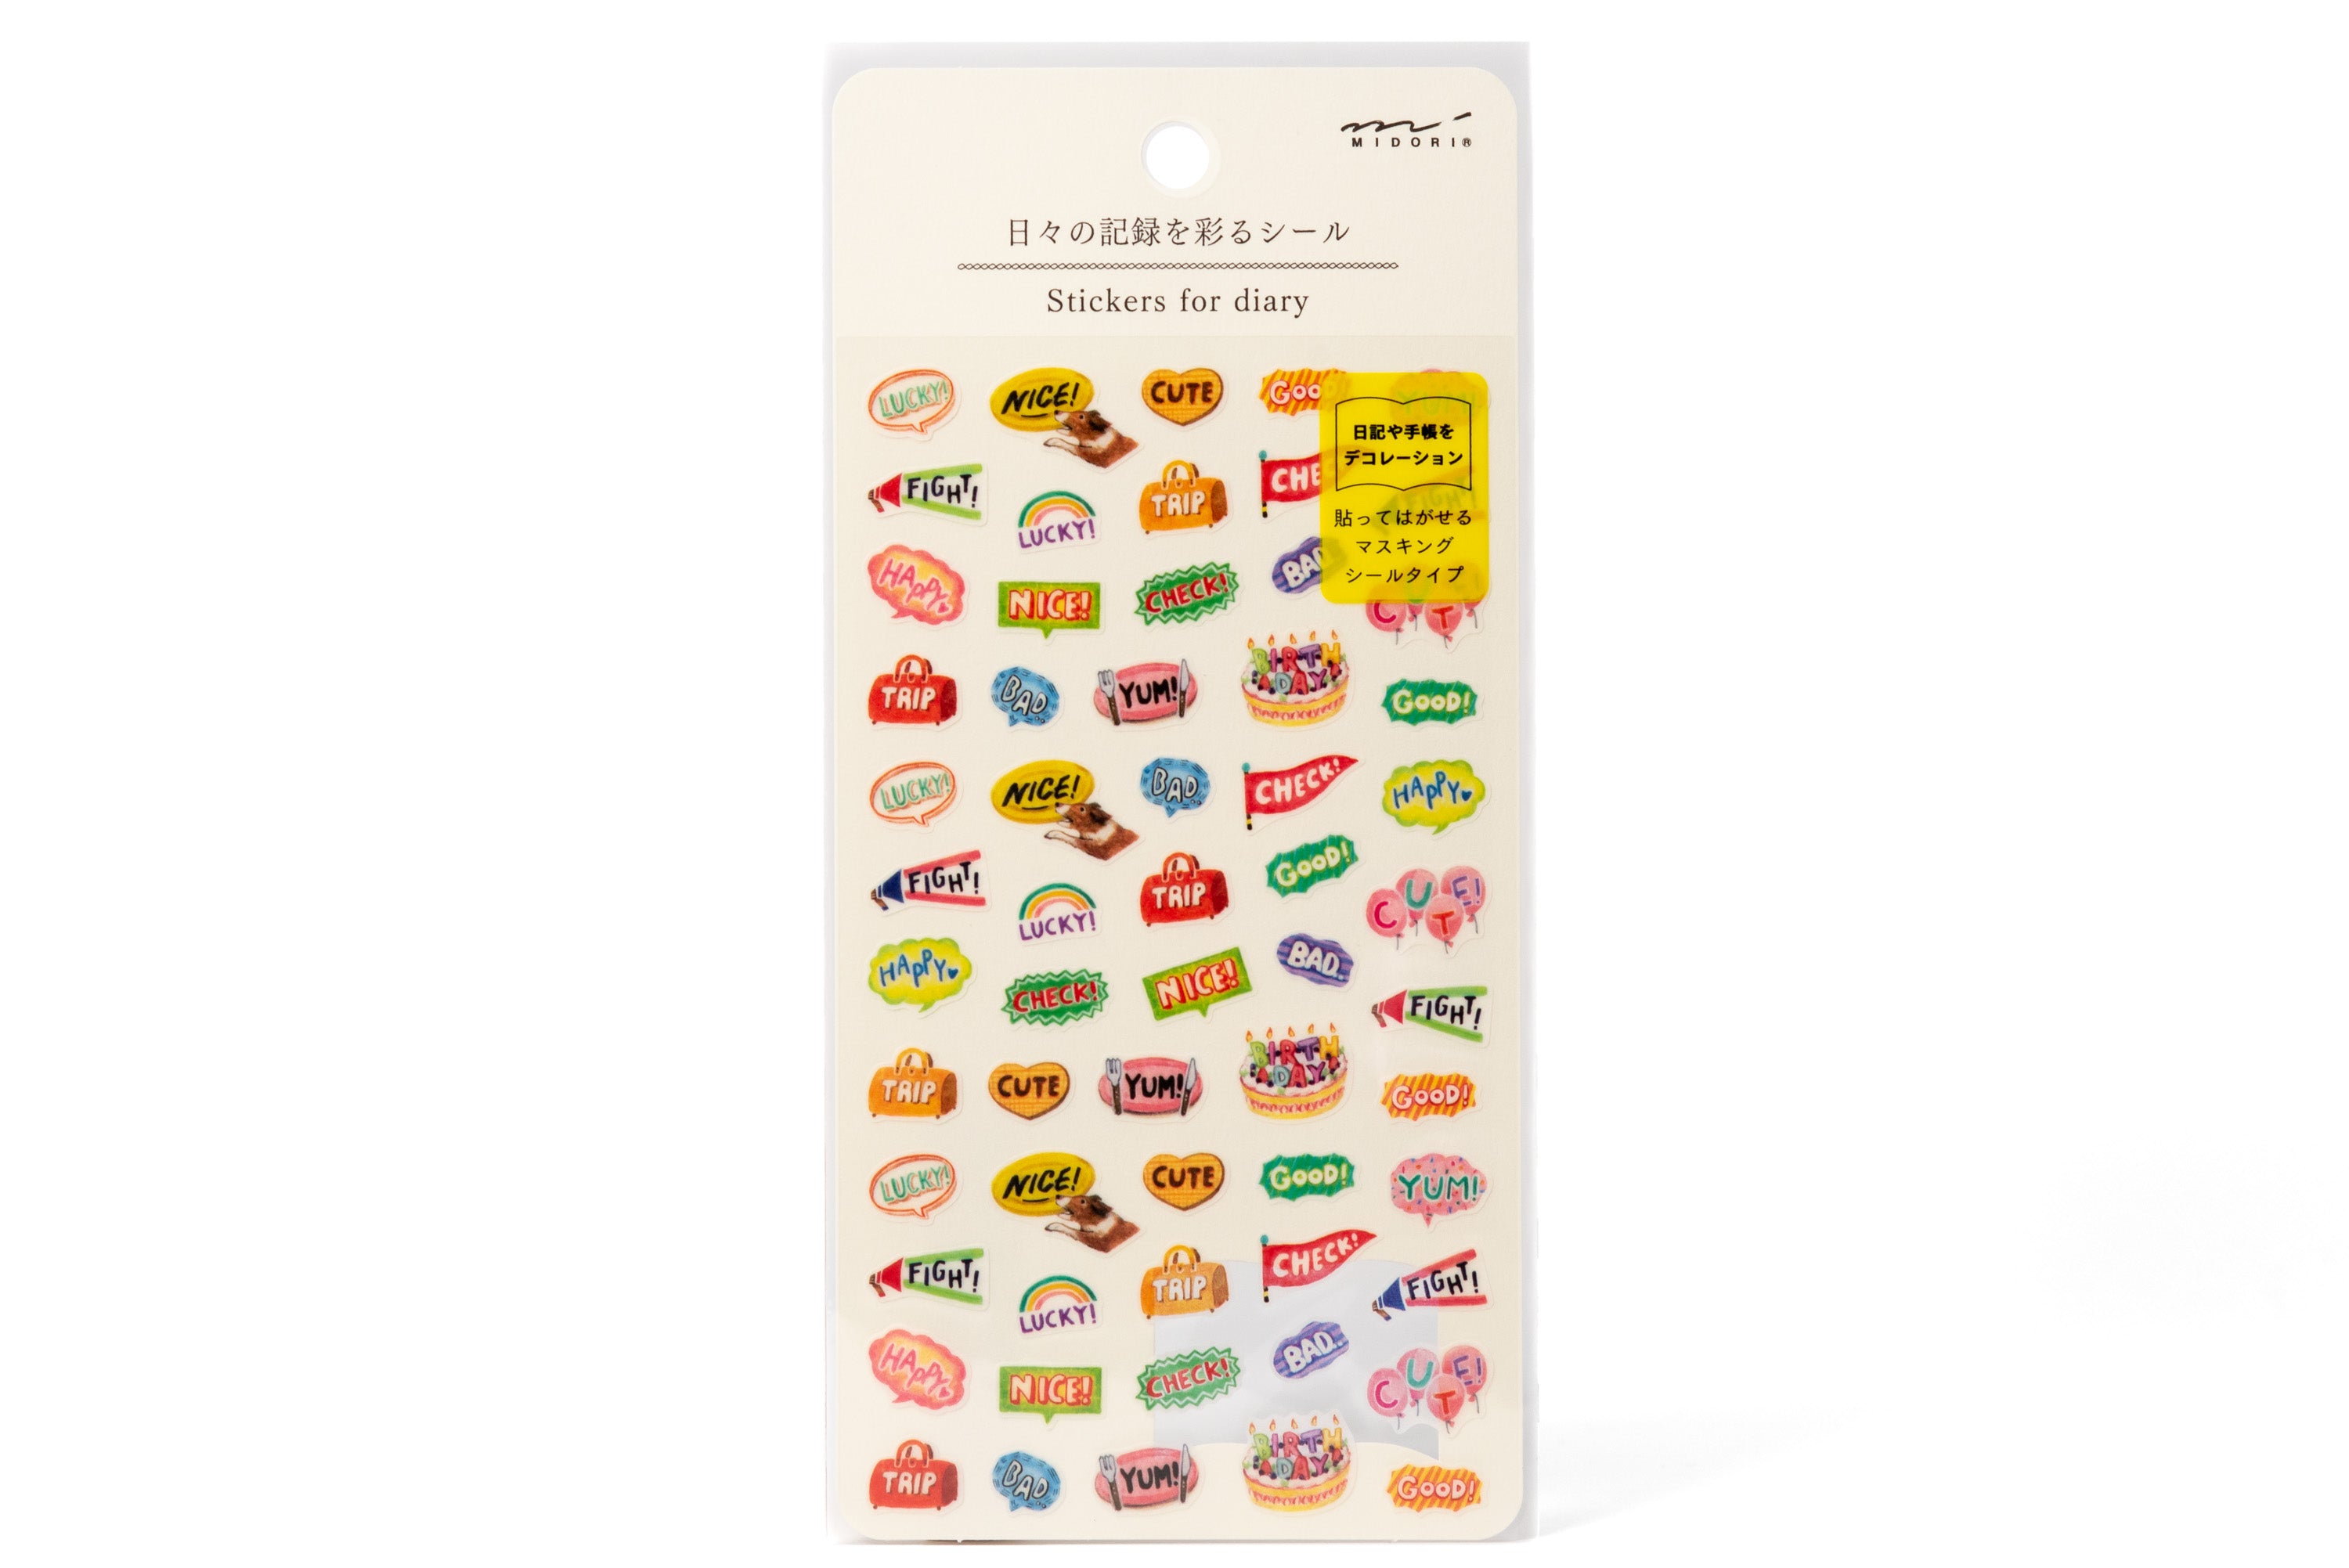 Midori Stickers for Diary, Word Bubbles – St. Louis Art Supply